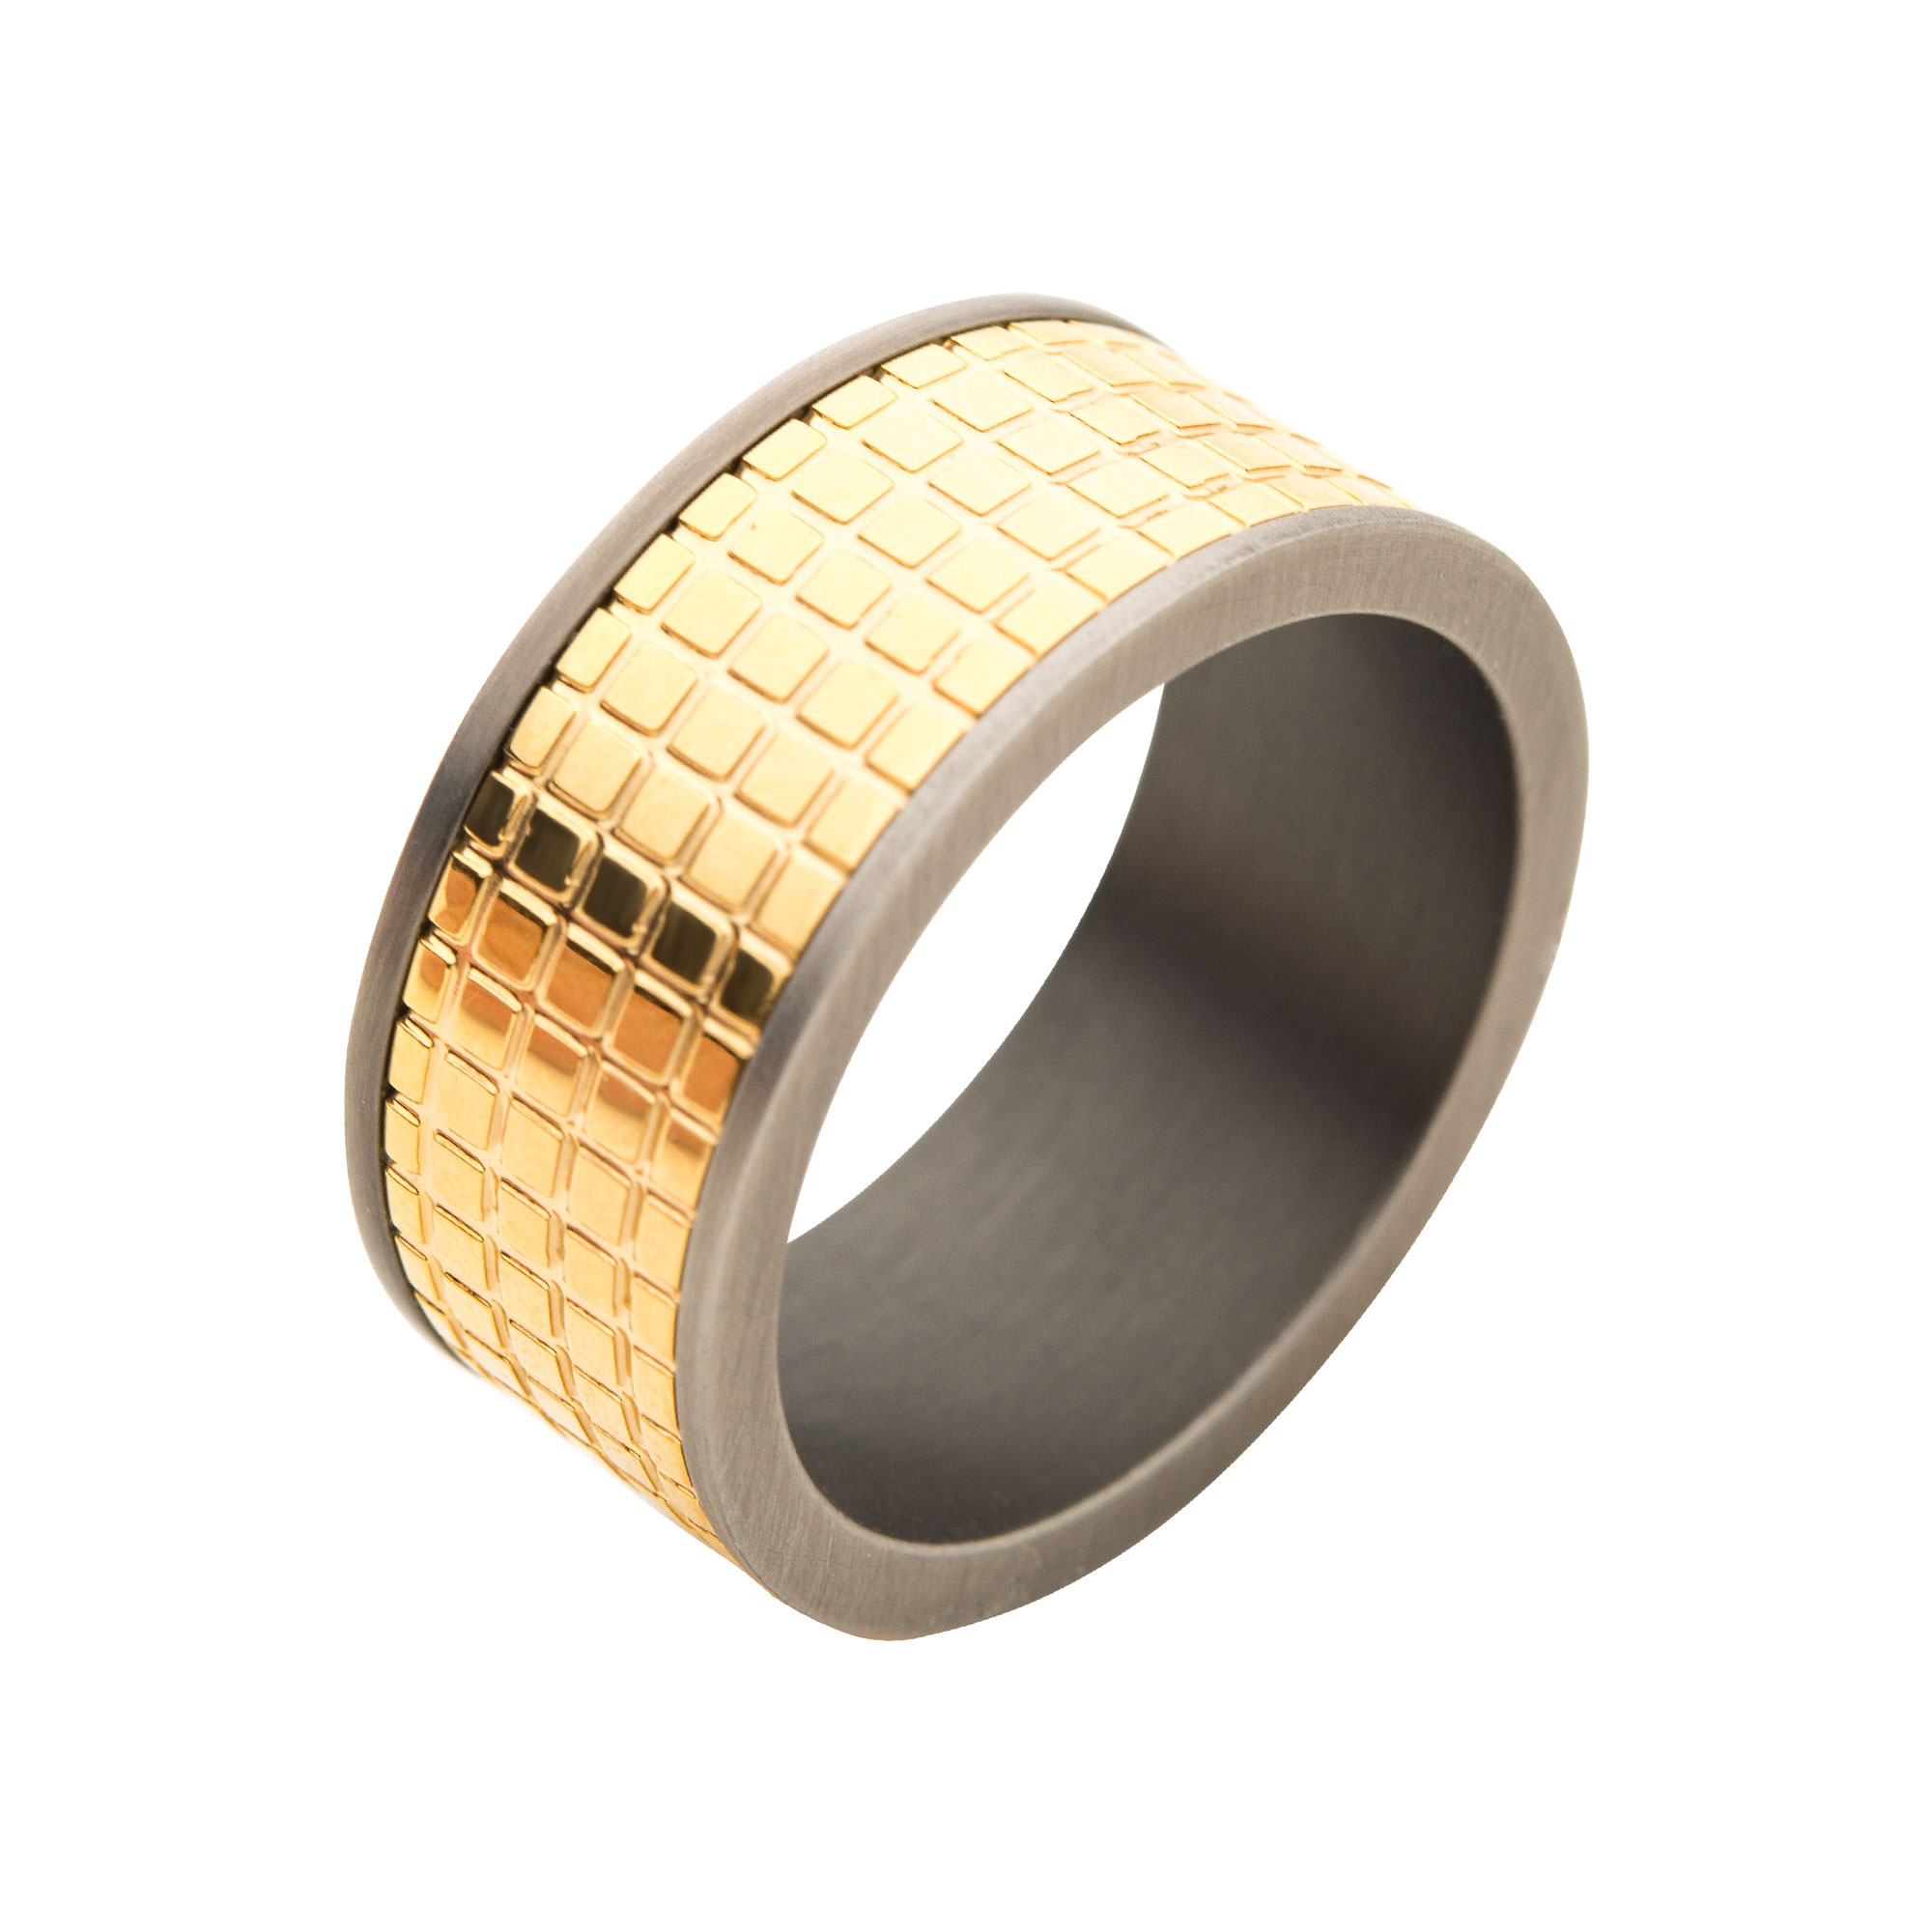 Gun Metal Plated with 18K Gold Plated Grid Inlay Ring Selman's Jewelers-Gemologist McComb, MS